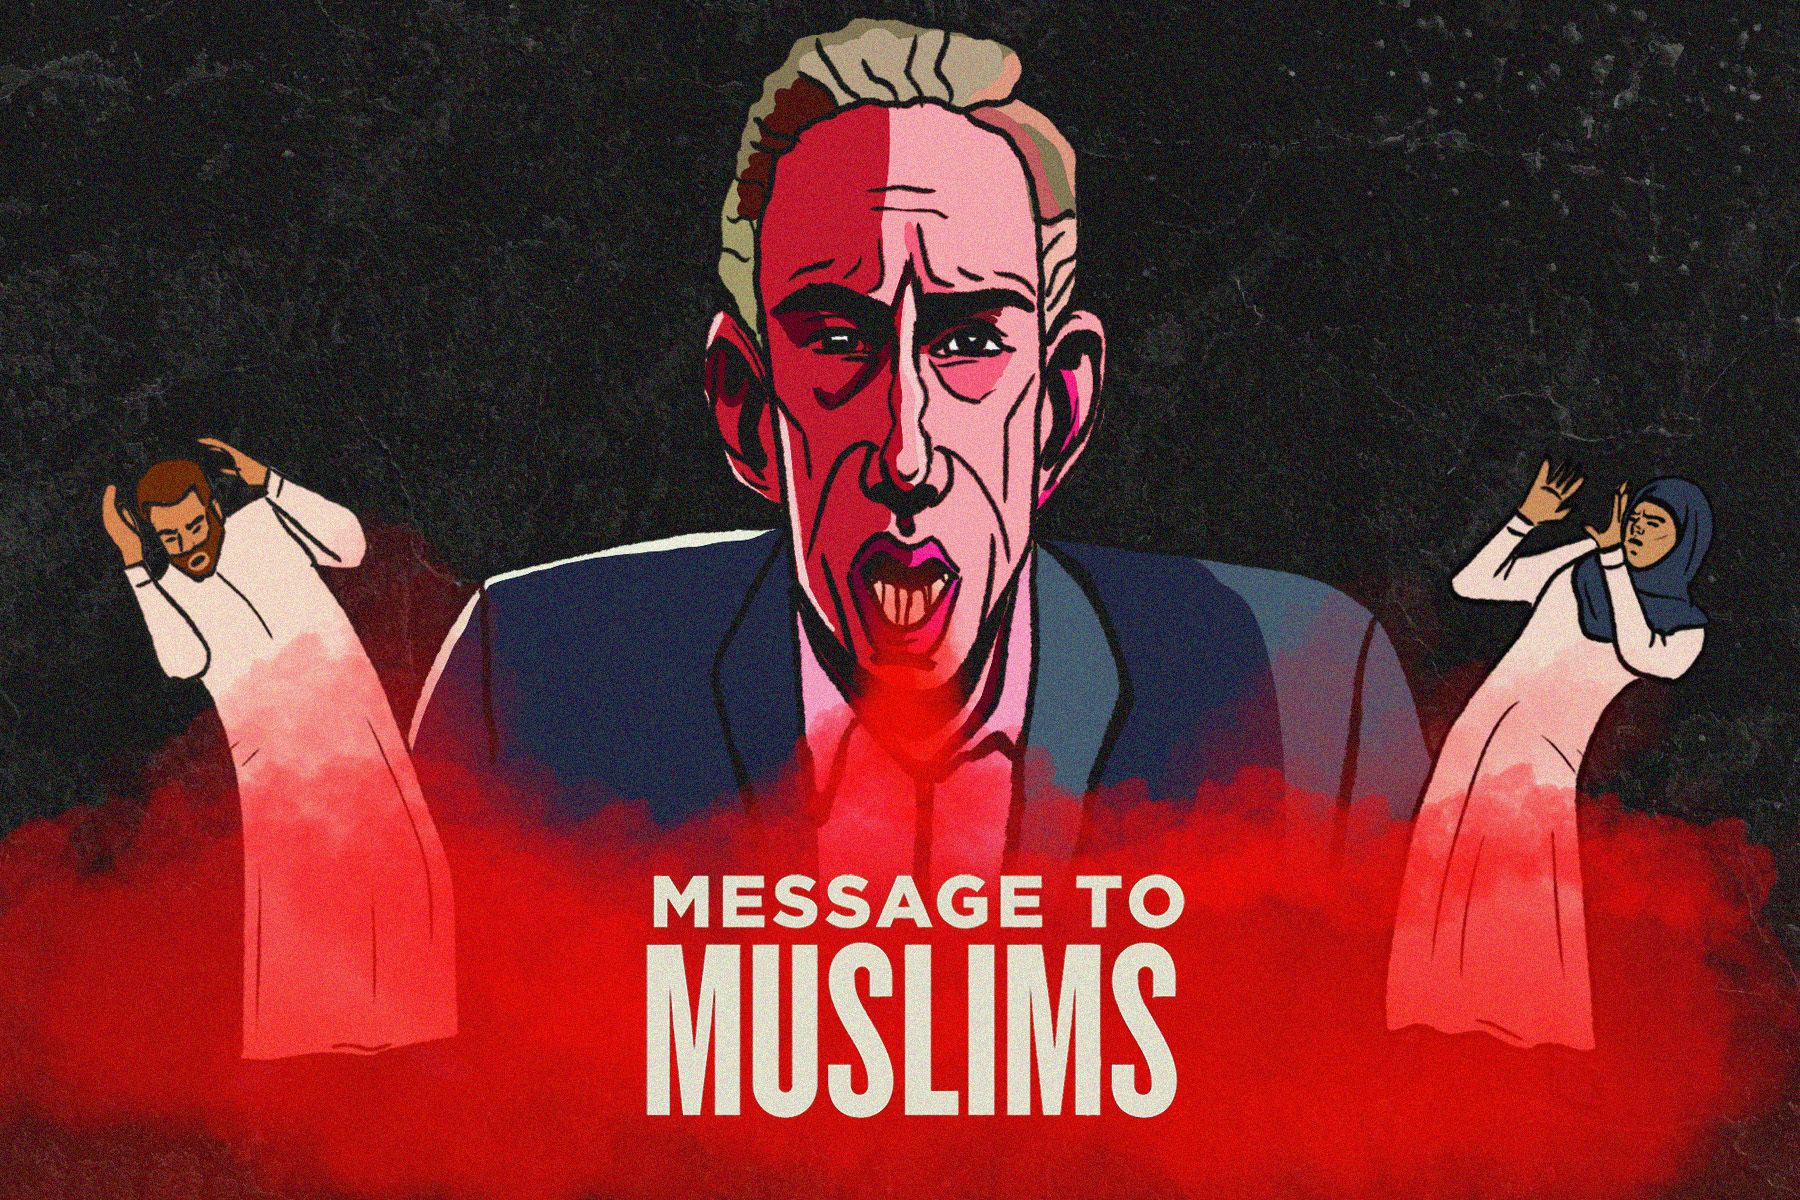 In an article about Jordan Peterson's video addressed to Muslims, an illustration of him spewing red smoke over Muslims.